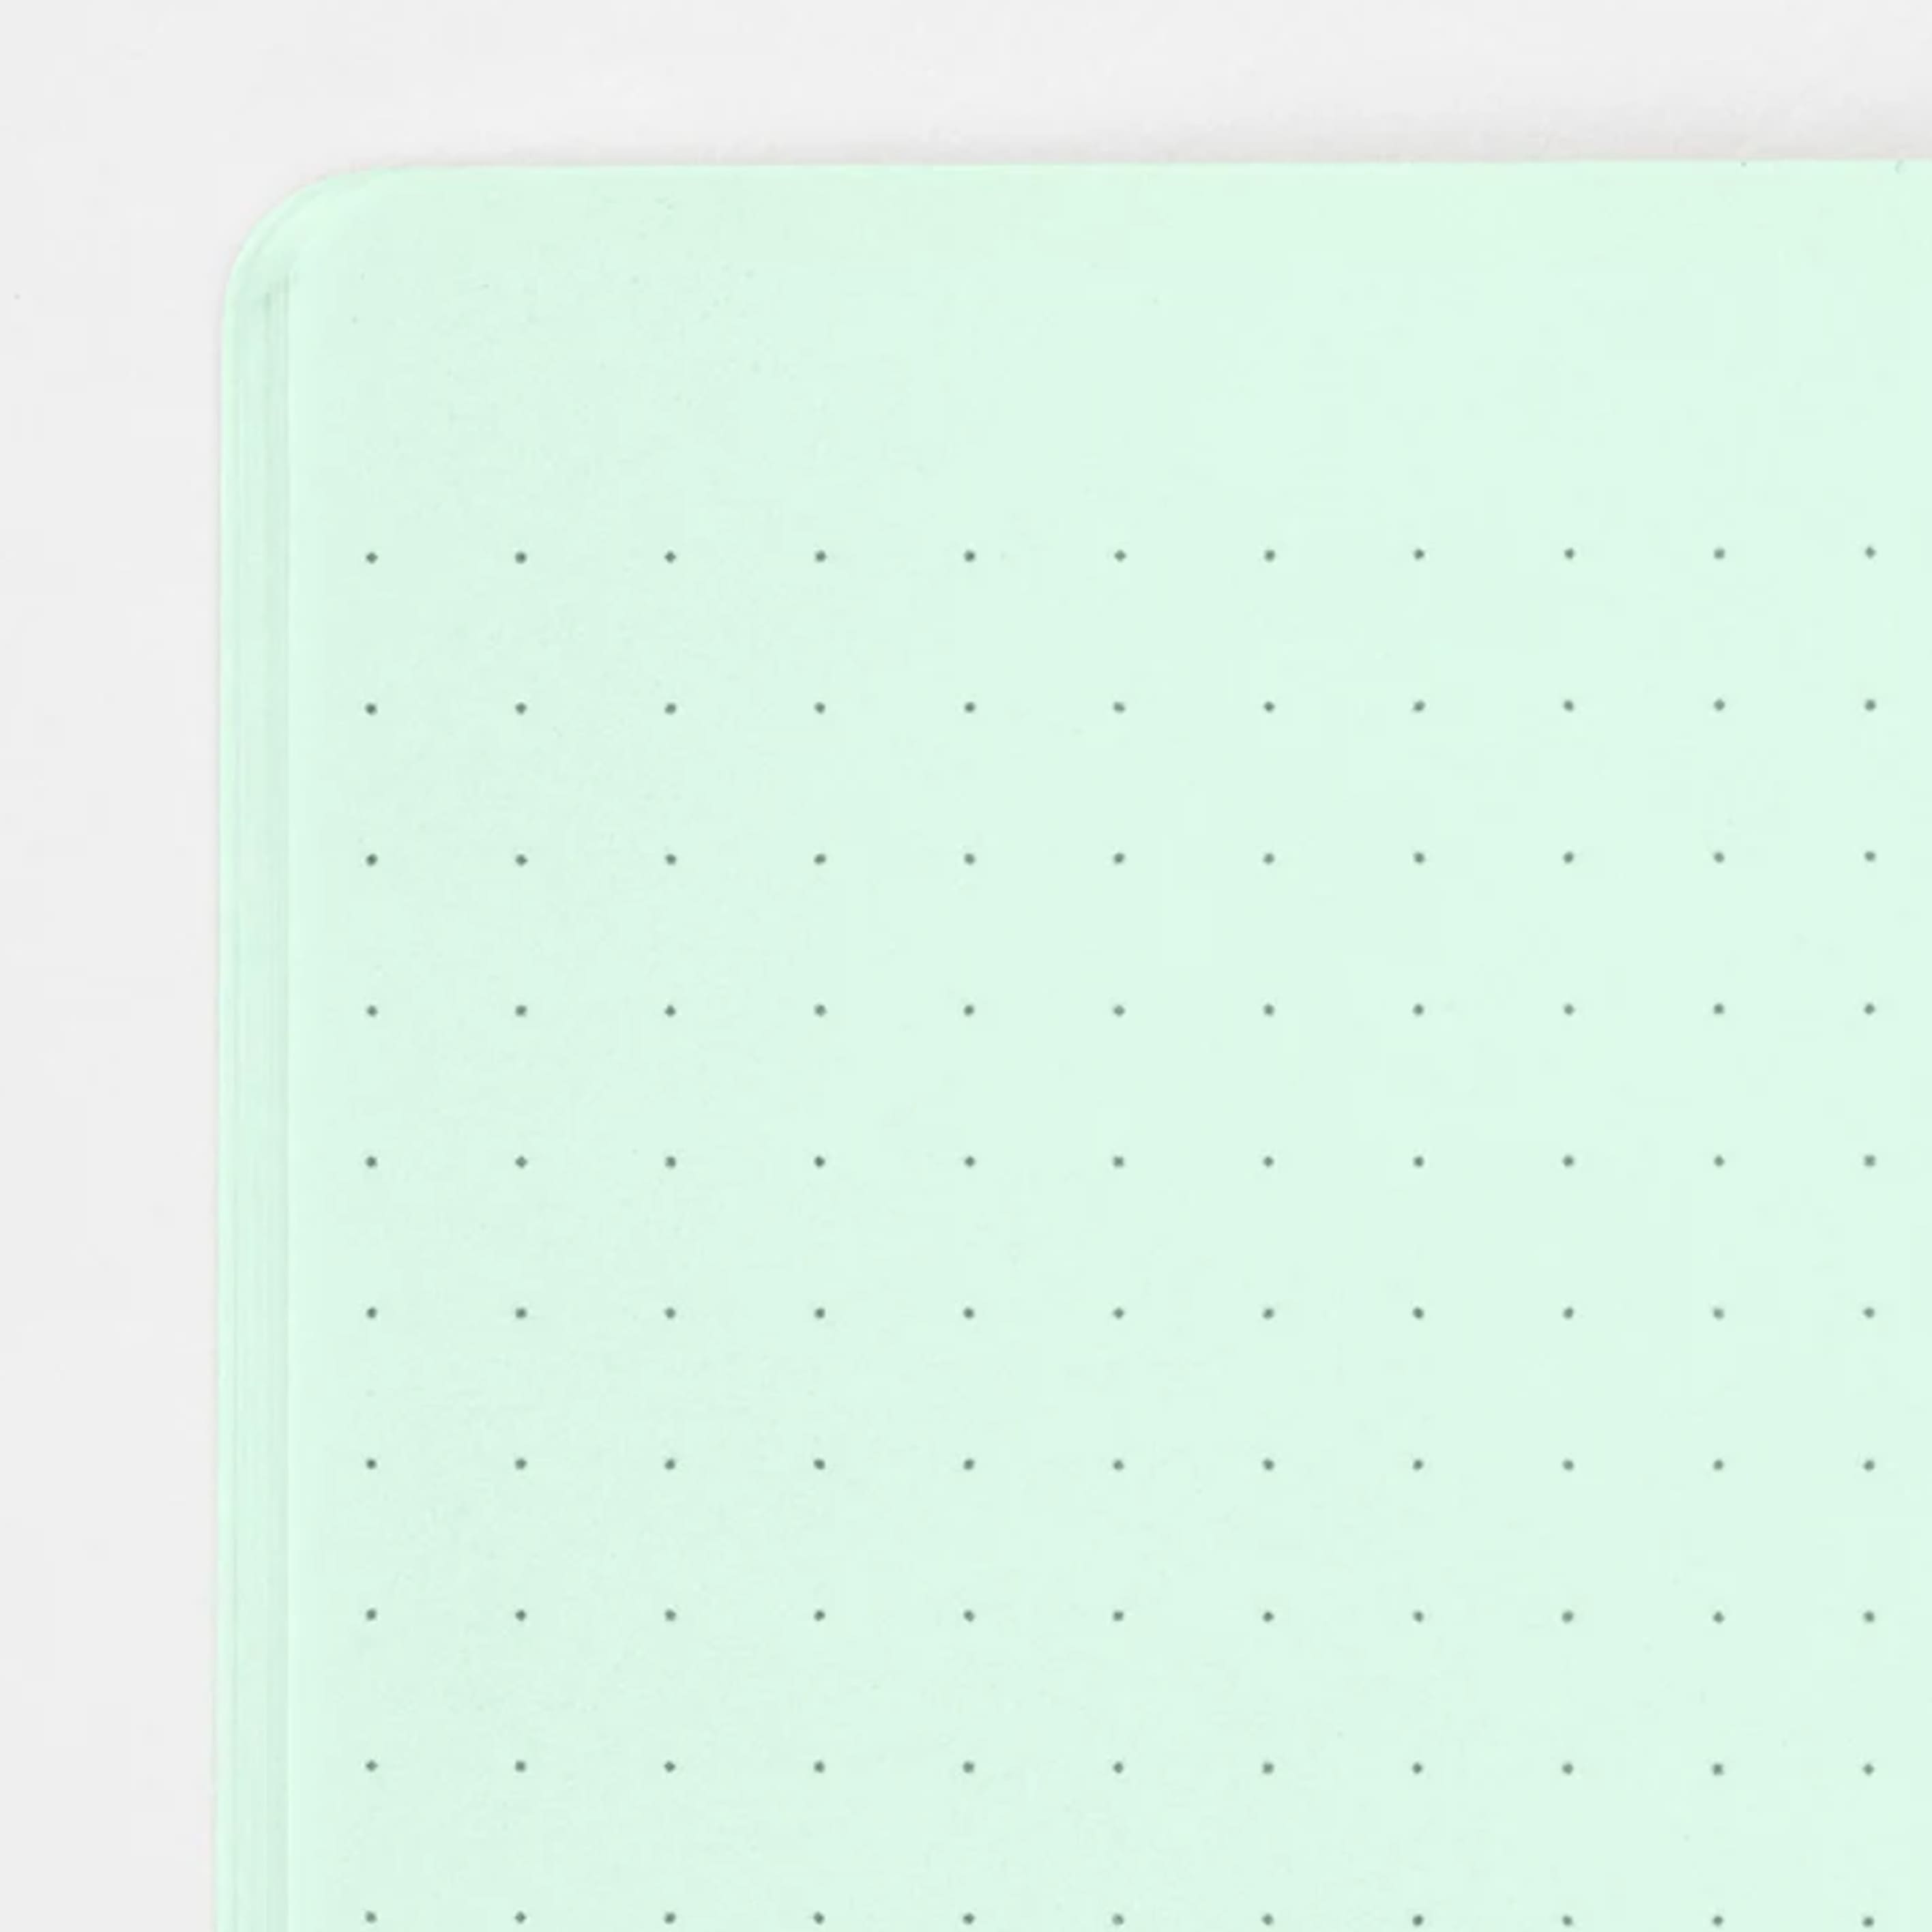 Notebook | Colour Notebook | Dot Grid | A5 | Midori | 6 COLOUR OPTIONS AVAILABLE